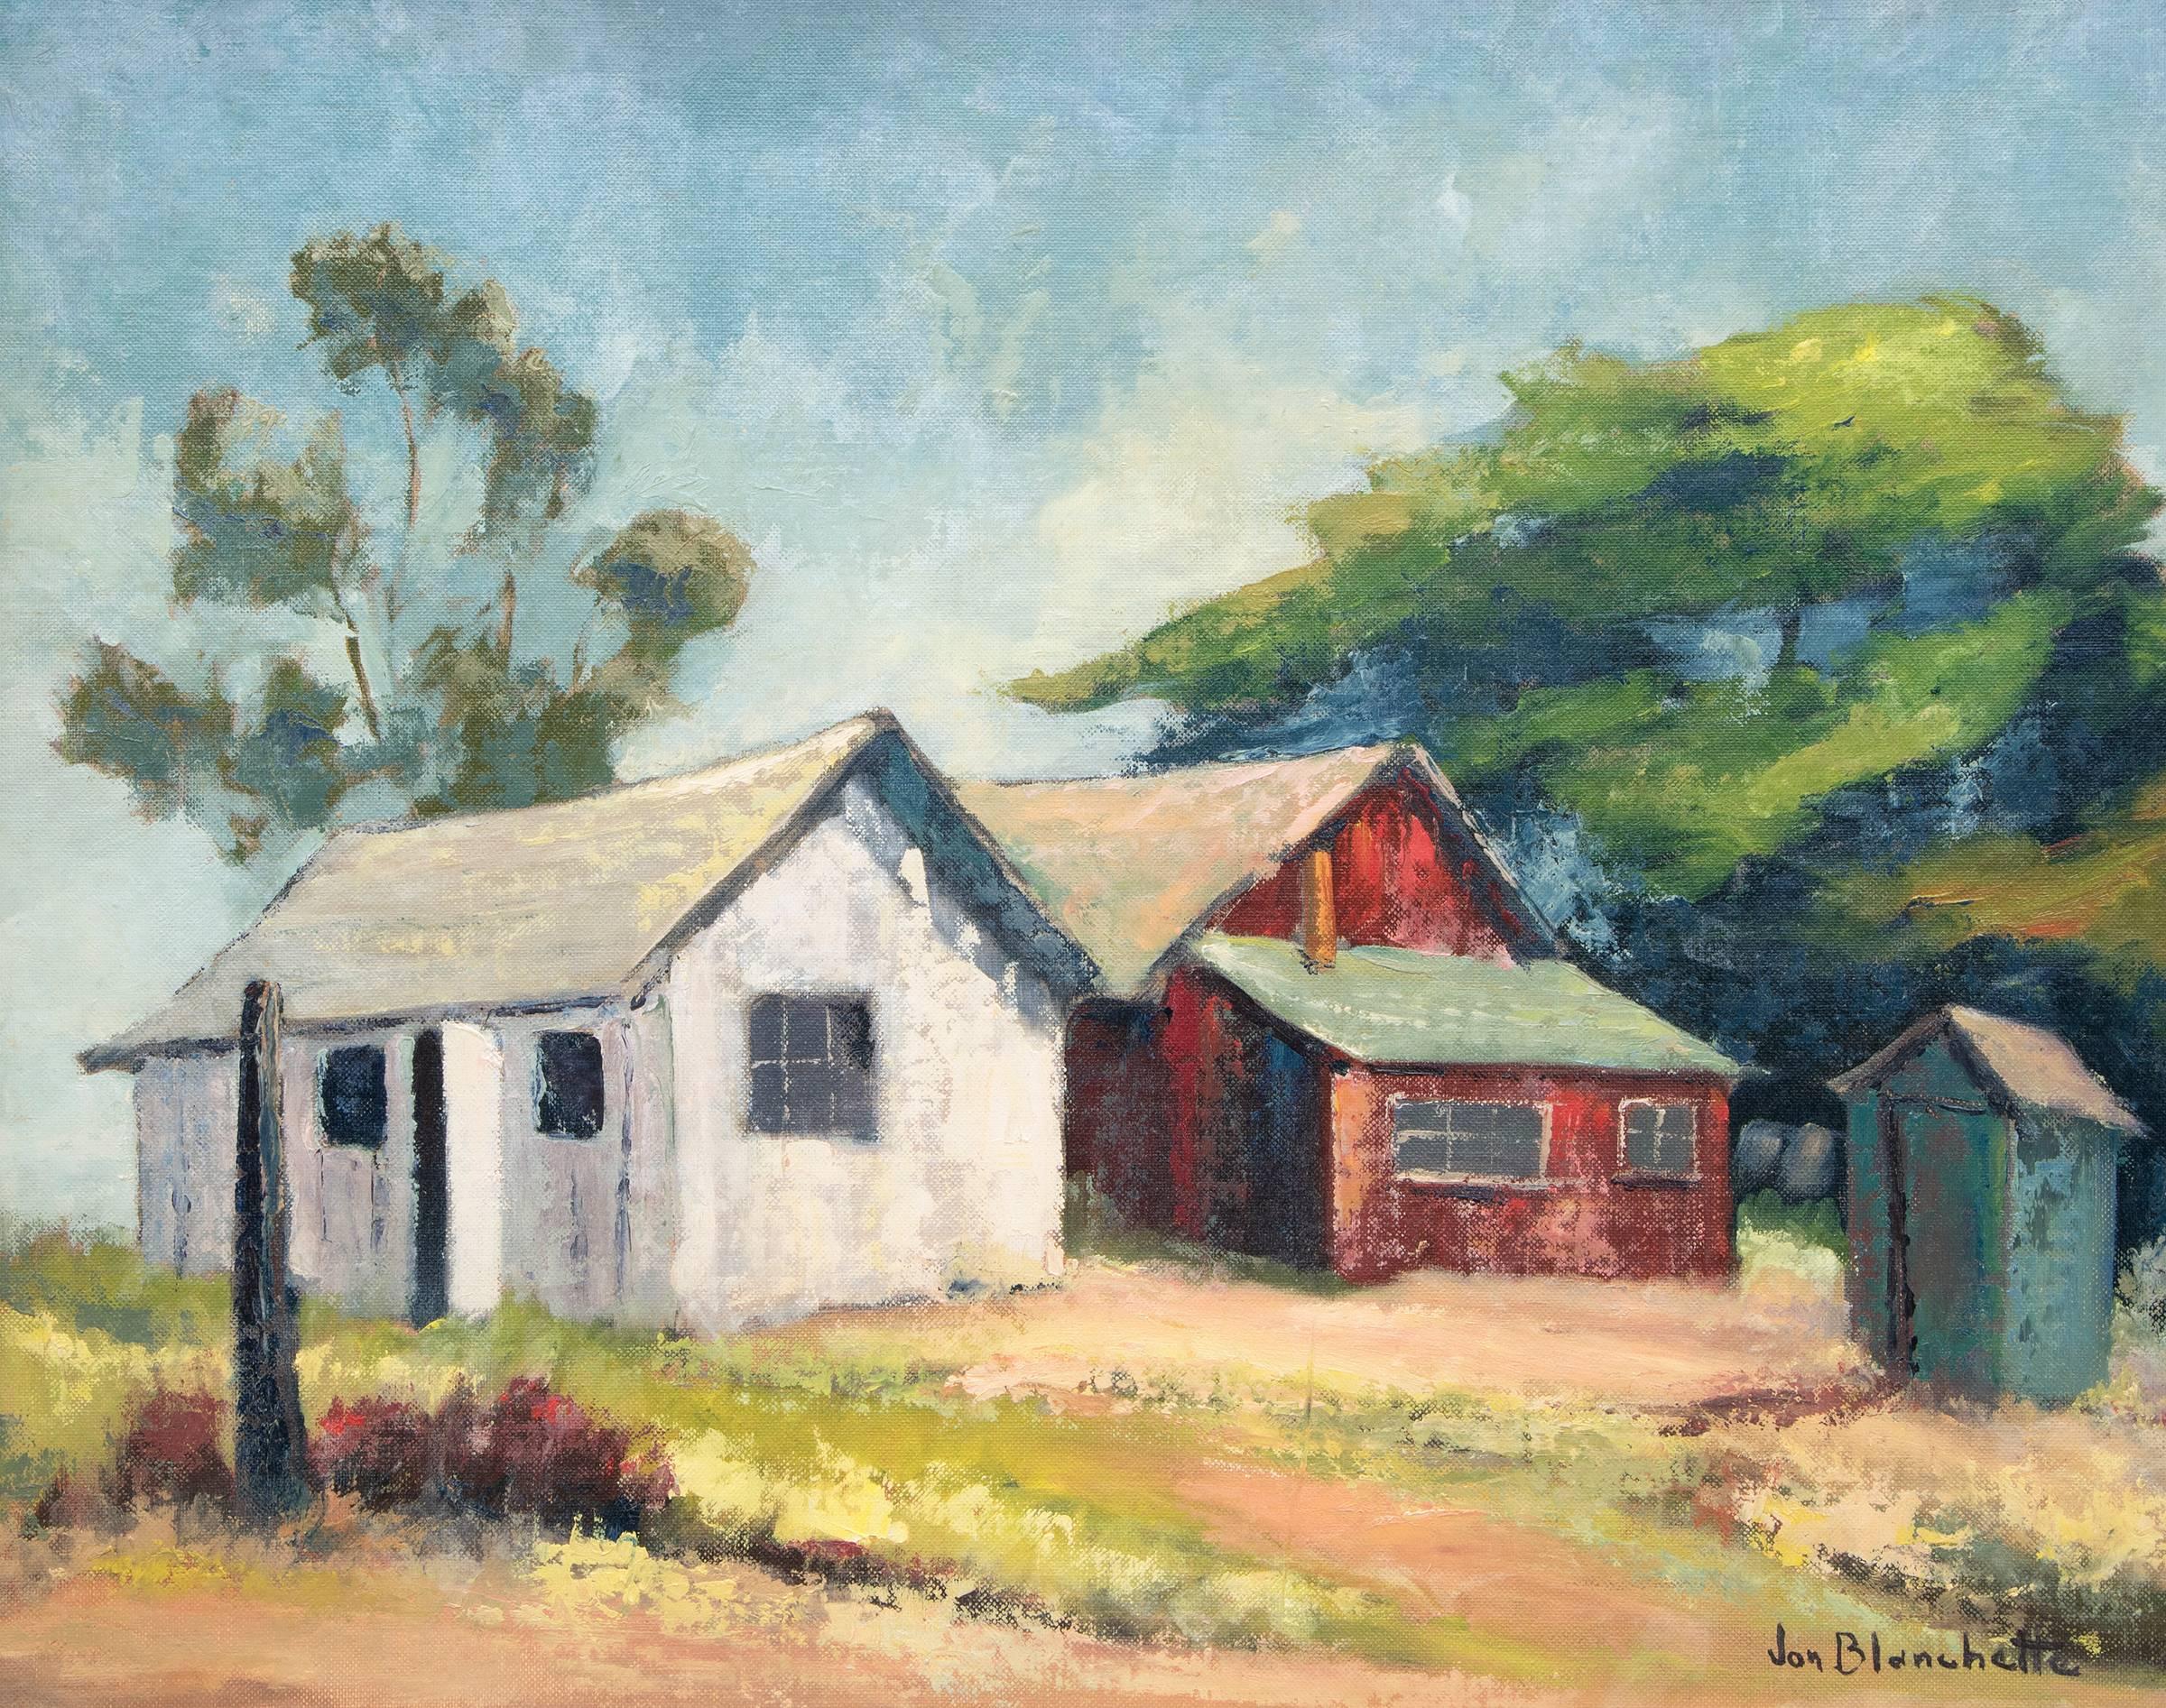 Barns in Soquel, California, Vintage Landscape, Blue Green Red White Beige - Painting by Jon Blanchette